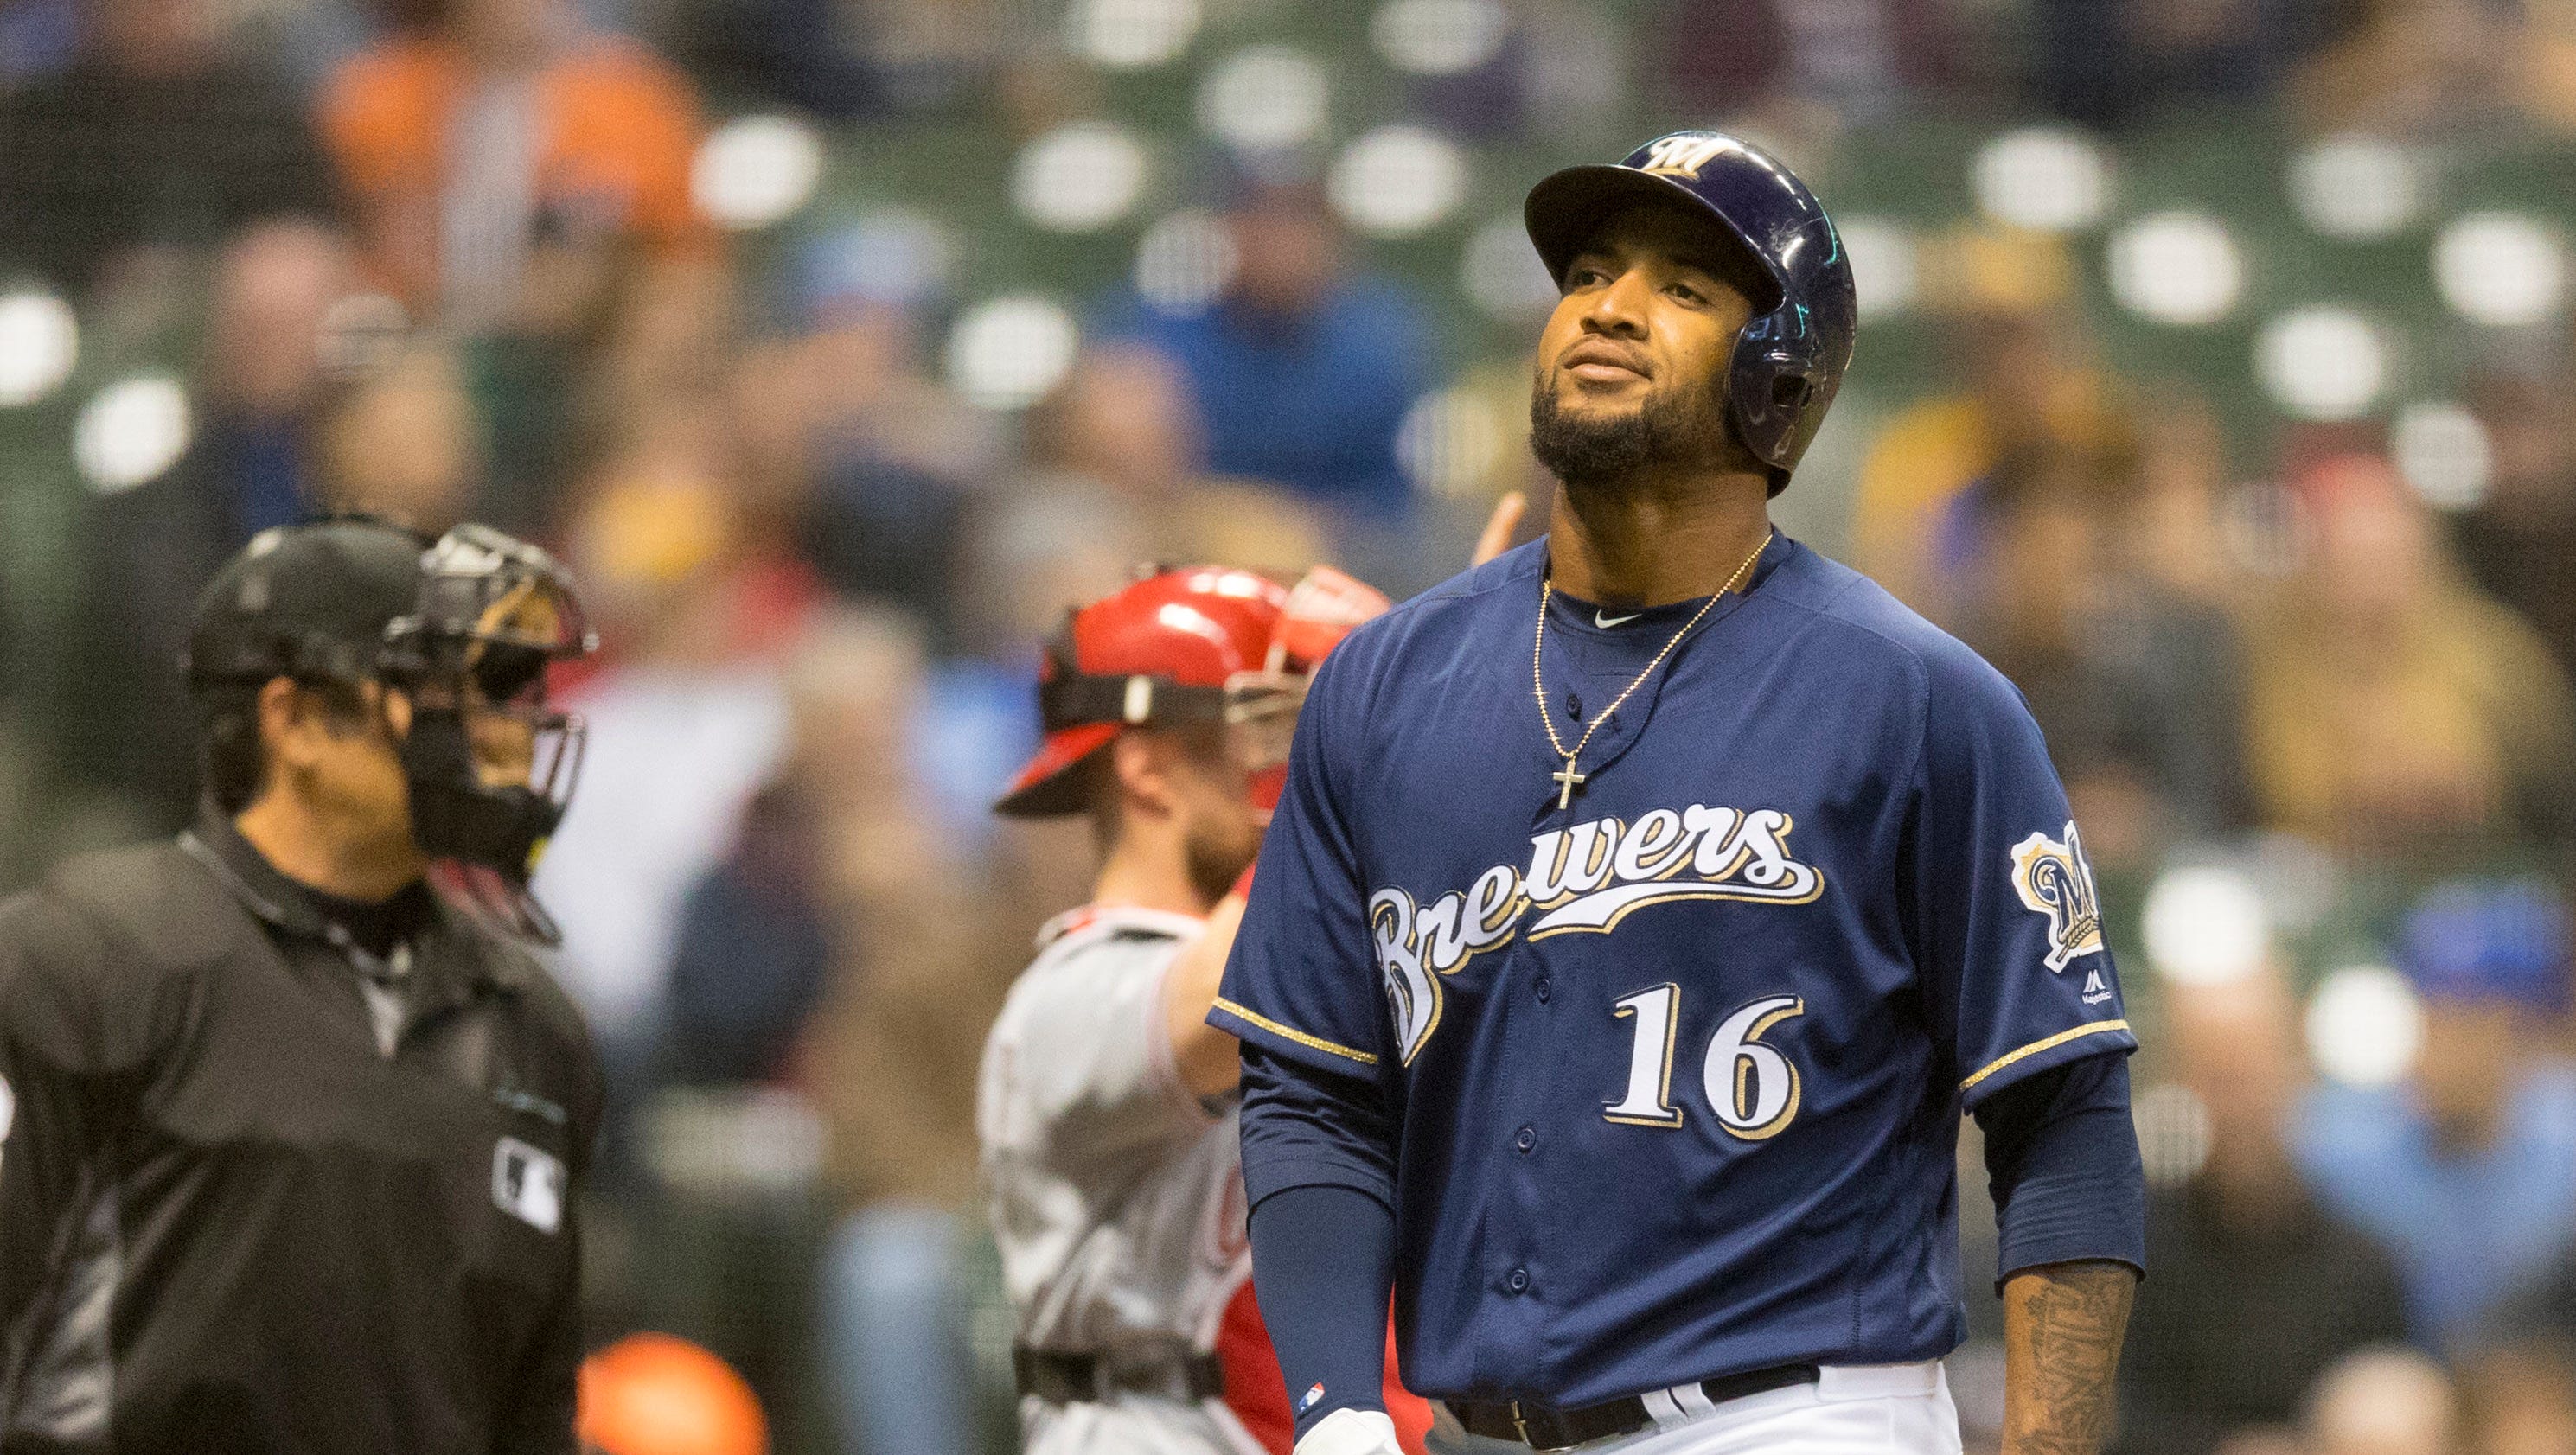 Brewers outfielder Domingo Santana has experienced a power outage so far